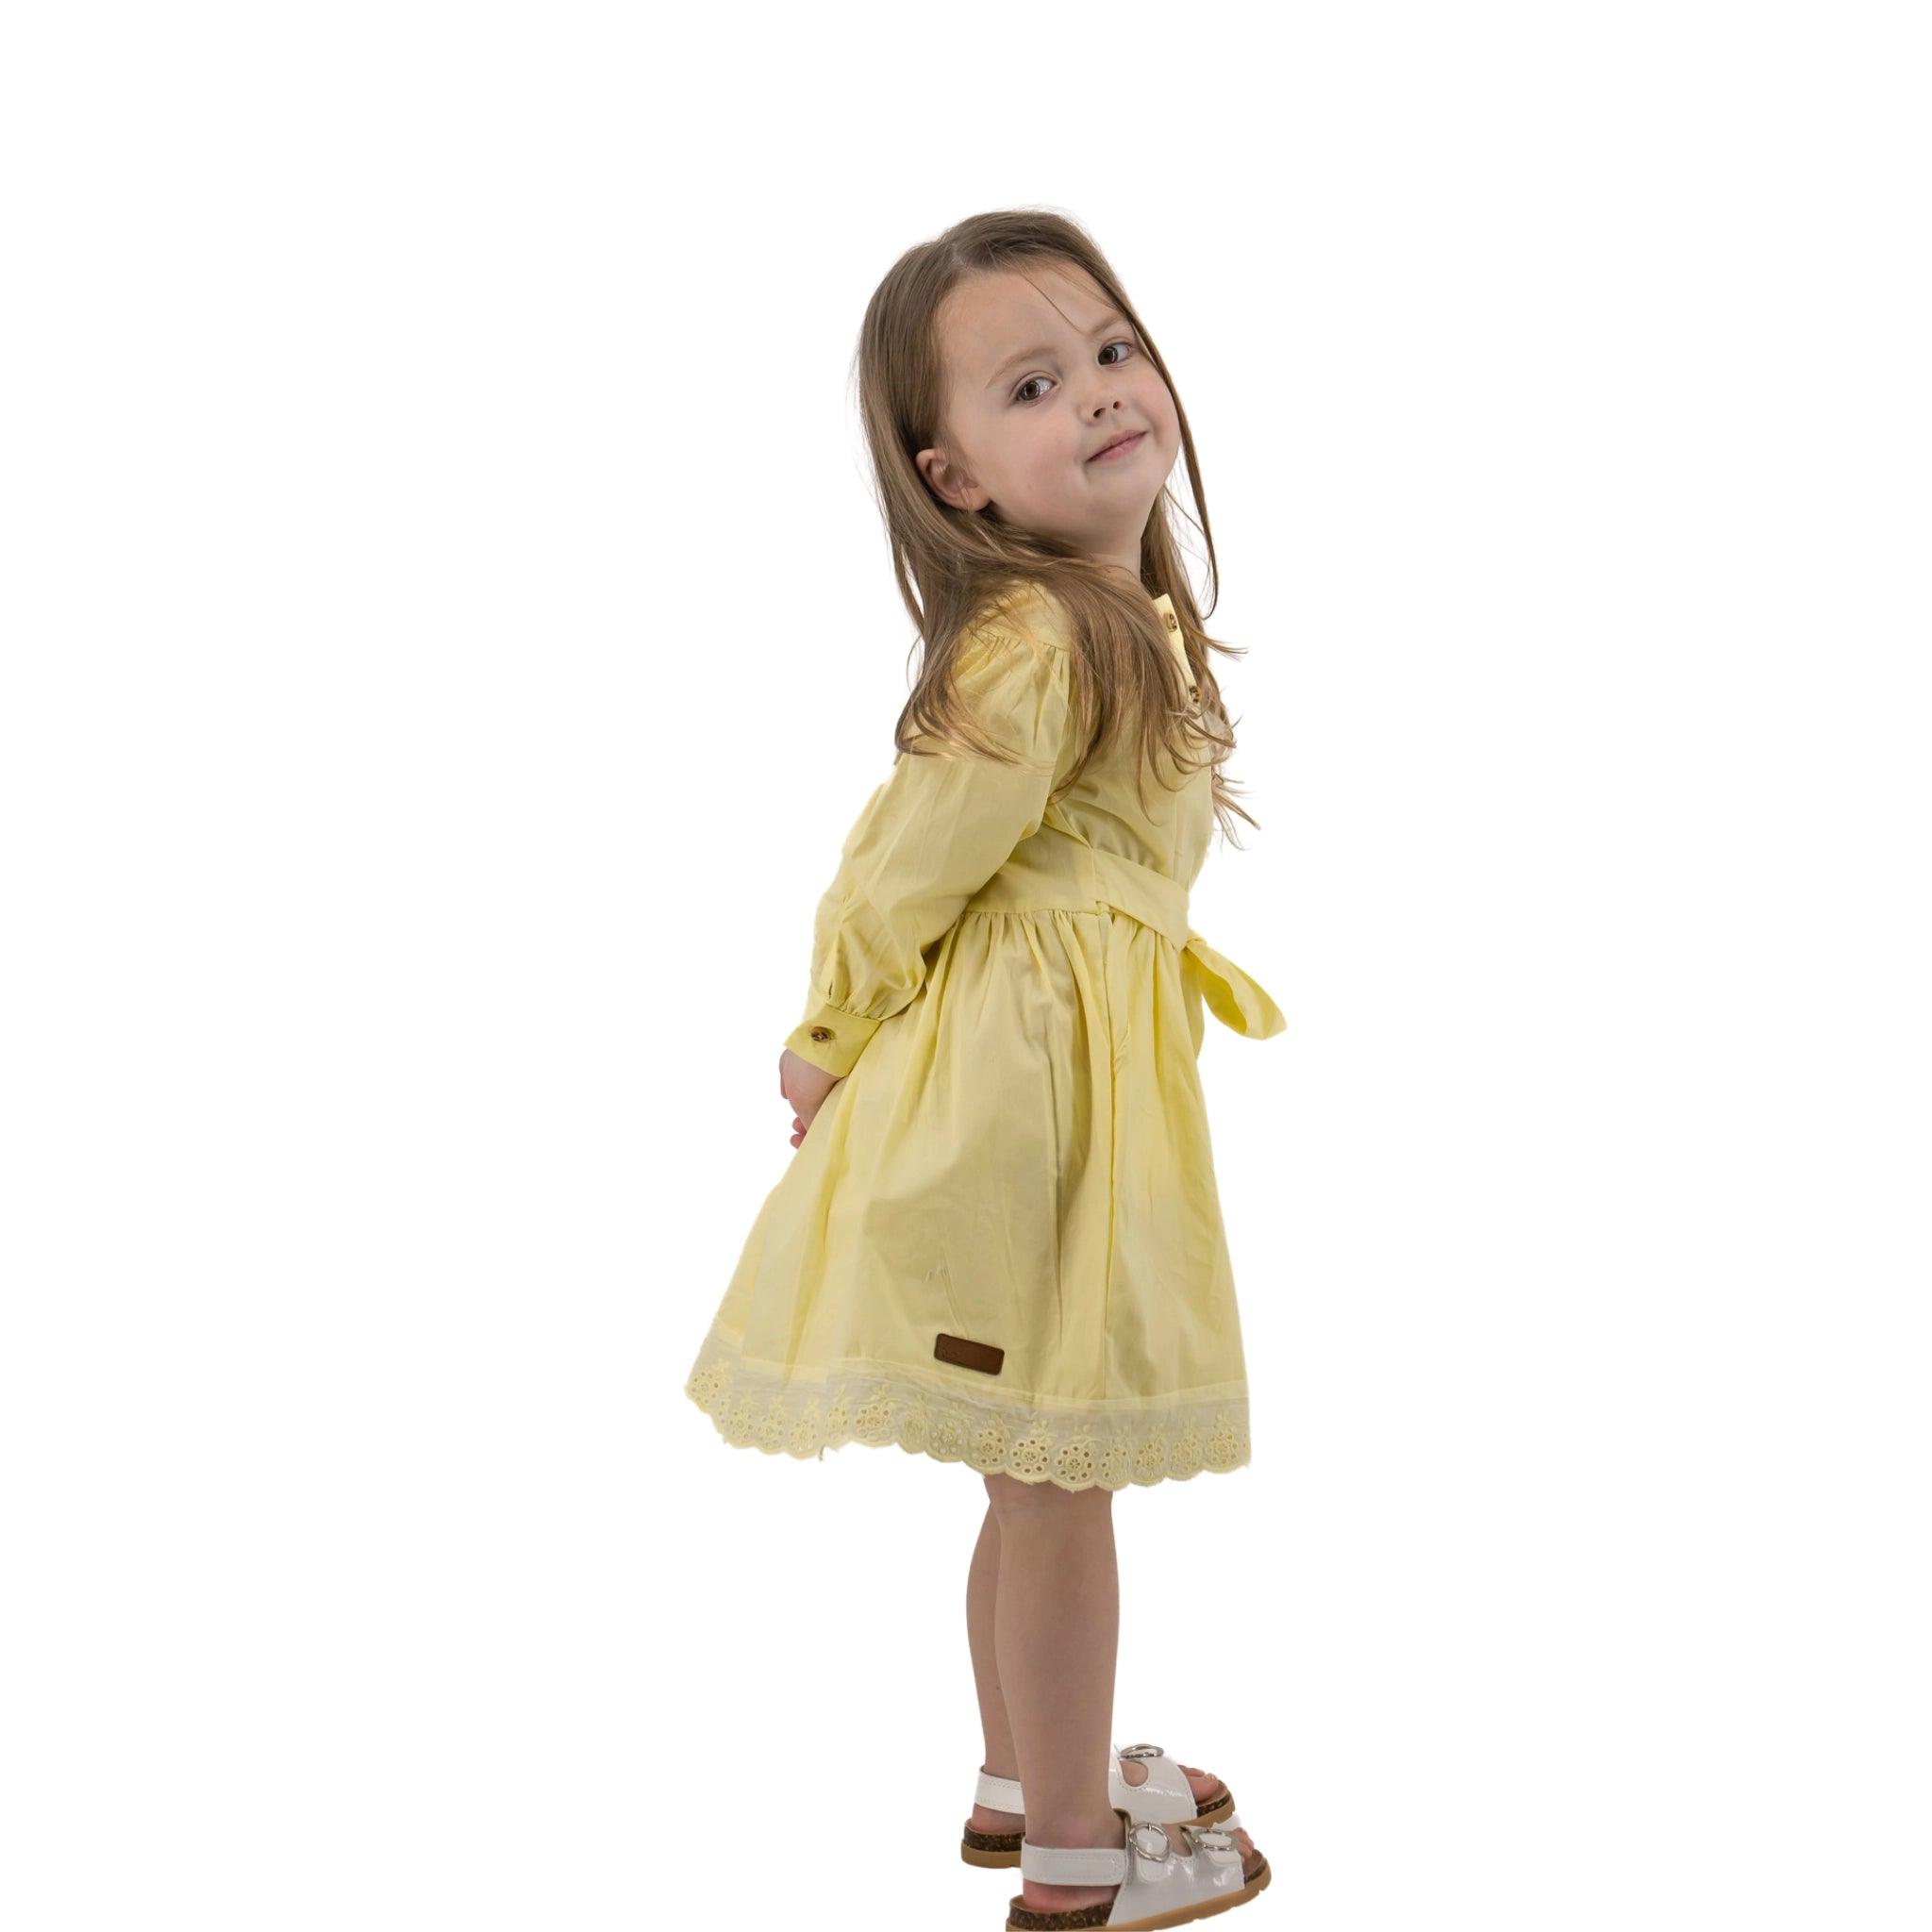 Young girl in a Karee yellow long puff sleeve cotton dress standing sideways and looking over her shoulder with a playful smile, isolated on a white background.